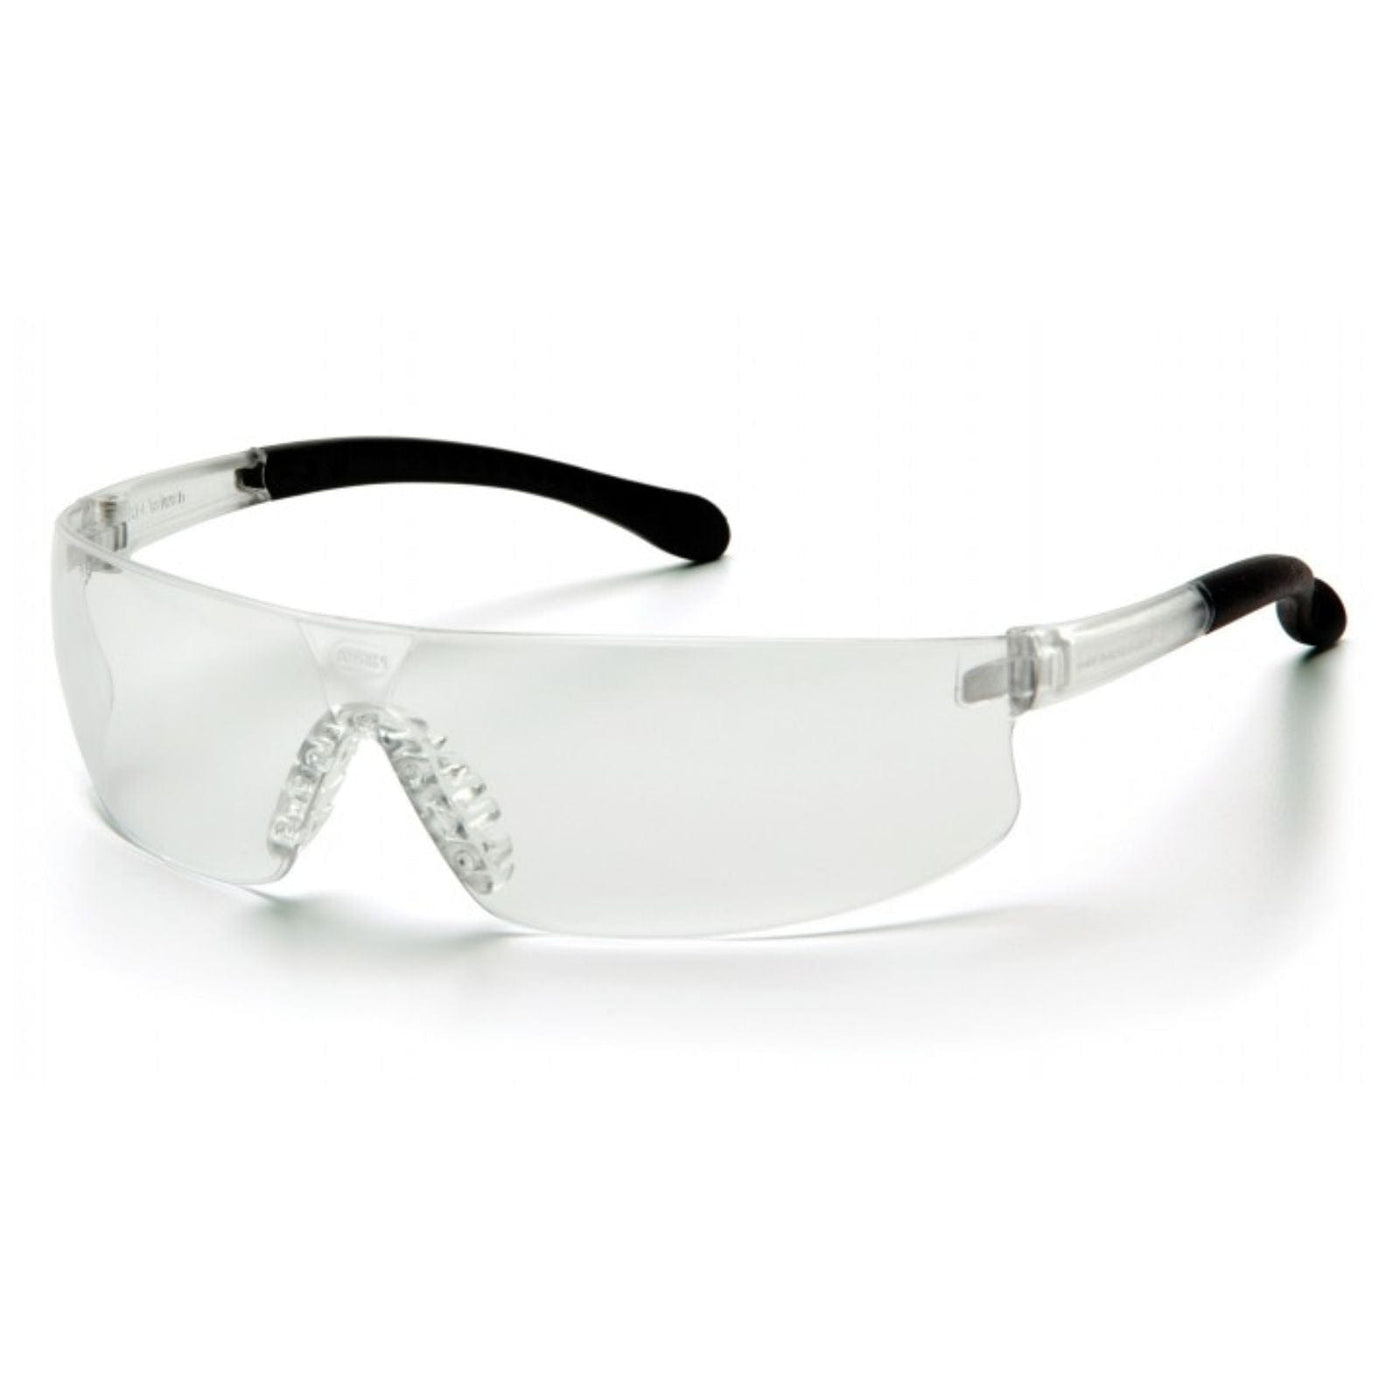 PYRAMEX SAFETY PRODUCTS Pyramex Provoq Safety Glasses Clear Frame Clear Lens Apparel